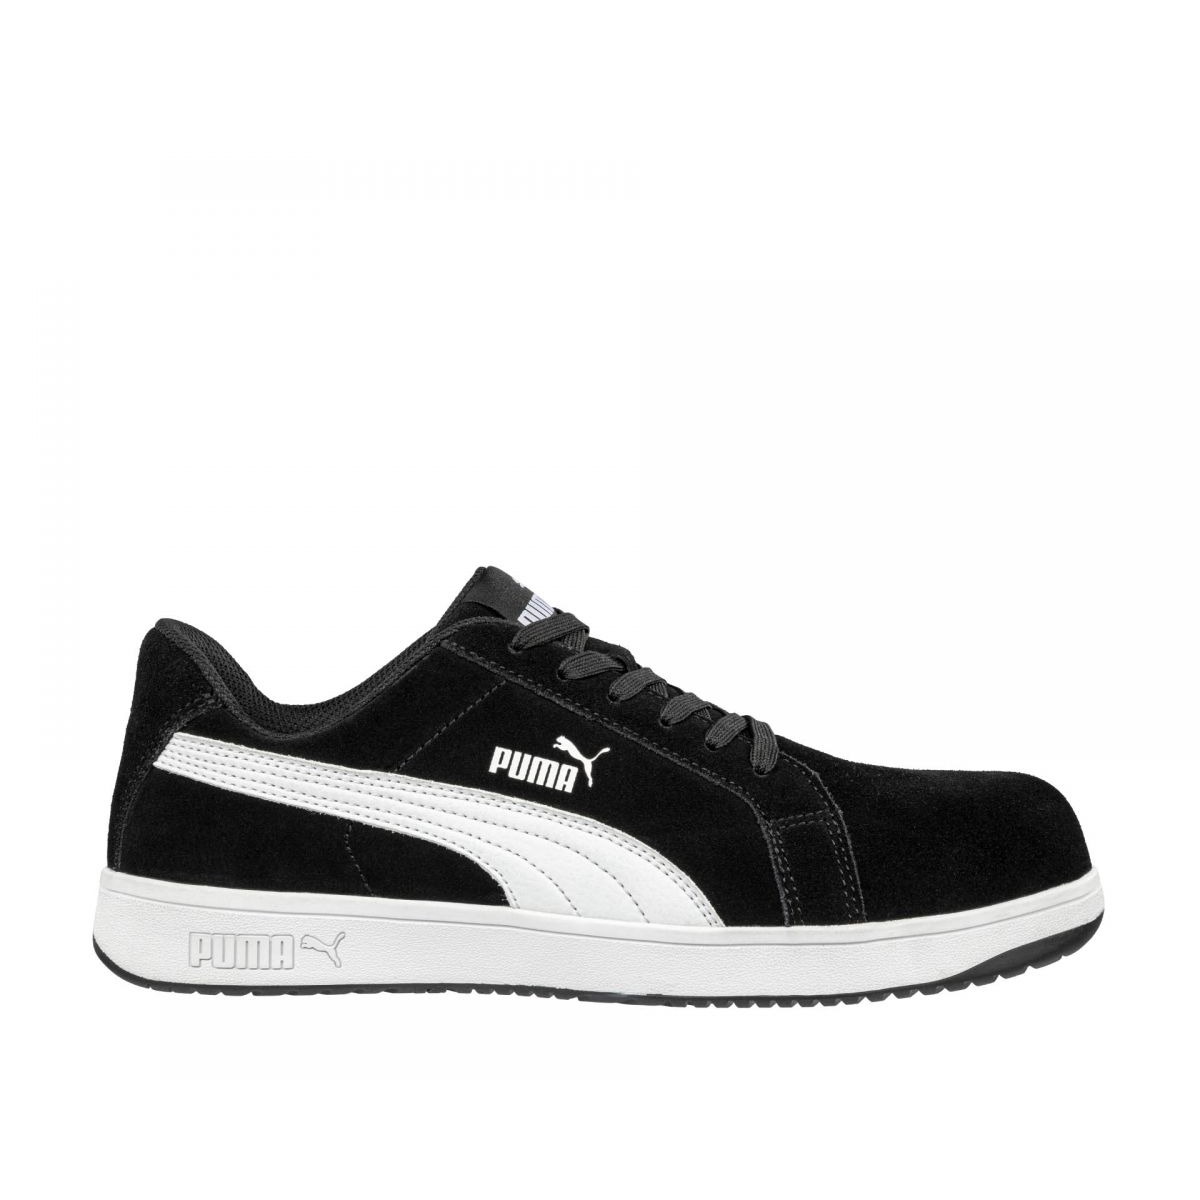 PUMA Safety Men's Iconic Low Composite Toe EH Work Shoes Black Suede - 640015 ONE SIZE BLACK - BLACK, 11.5